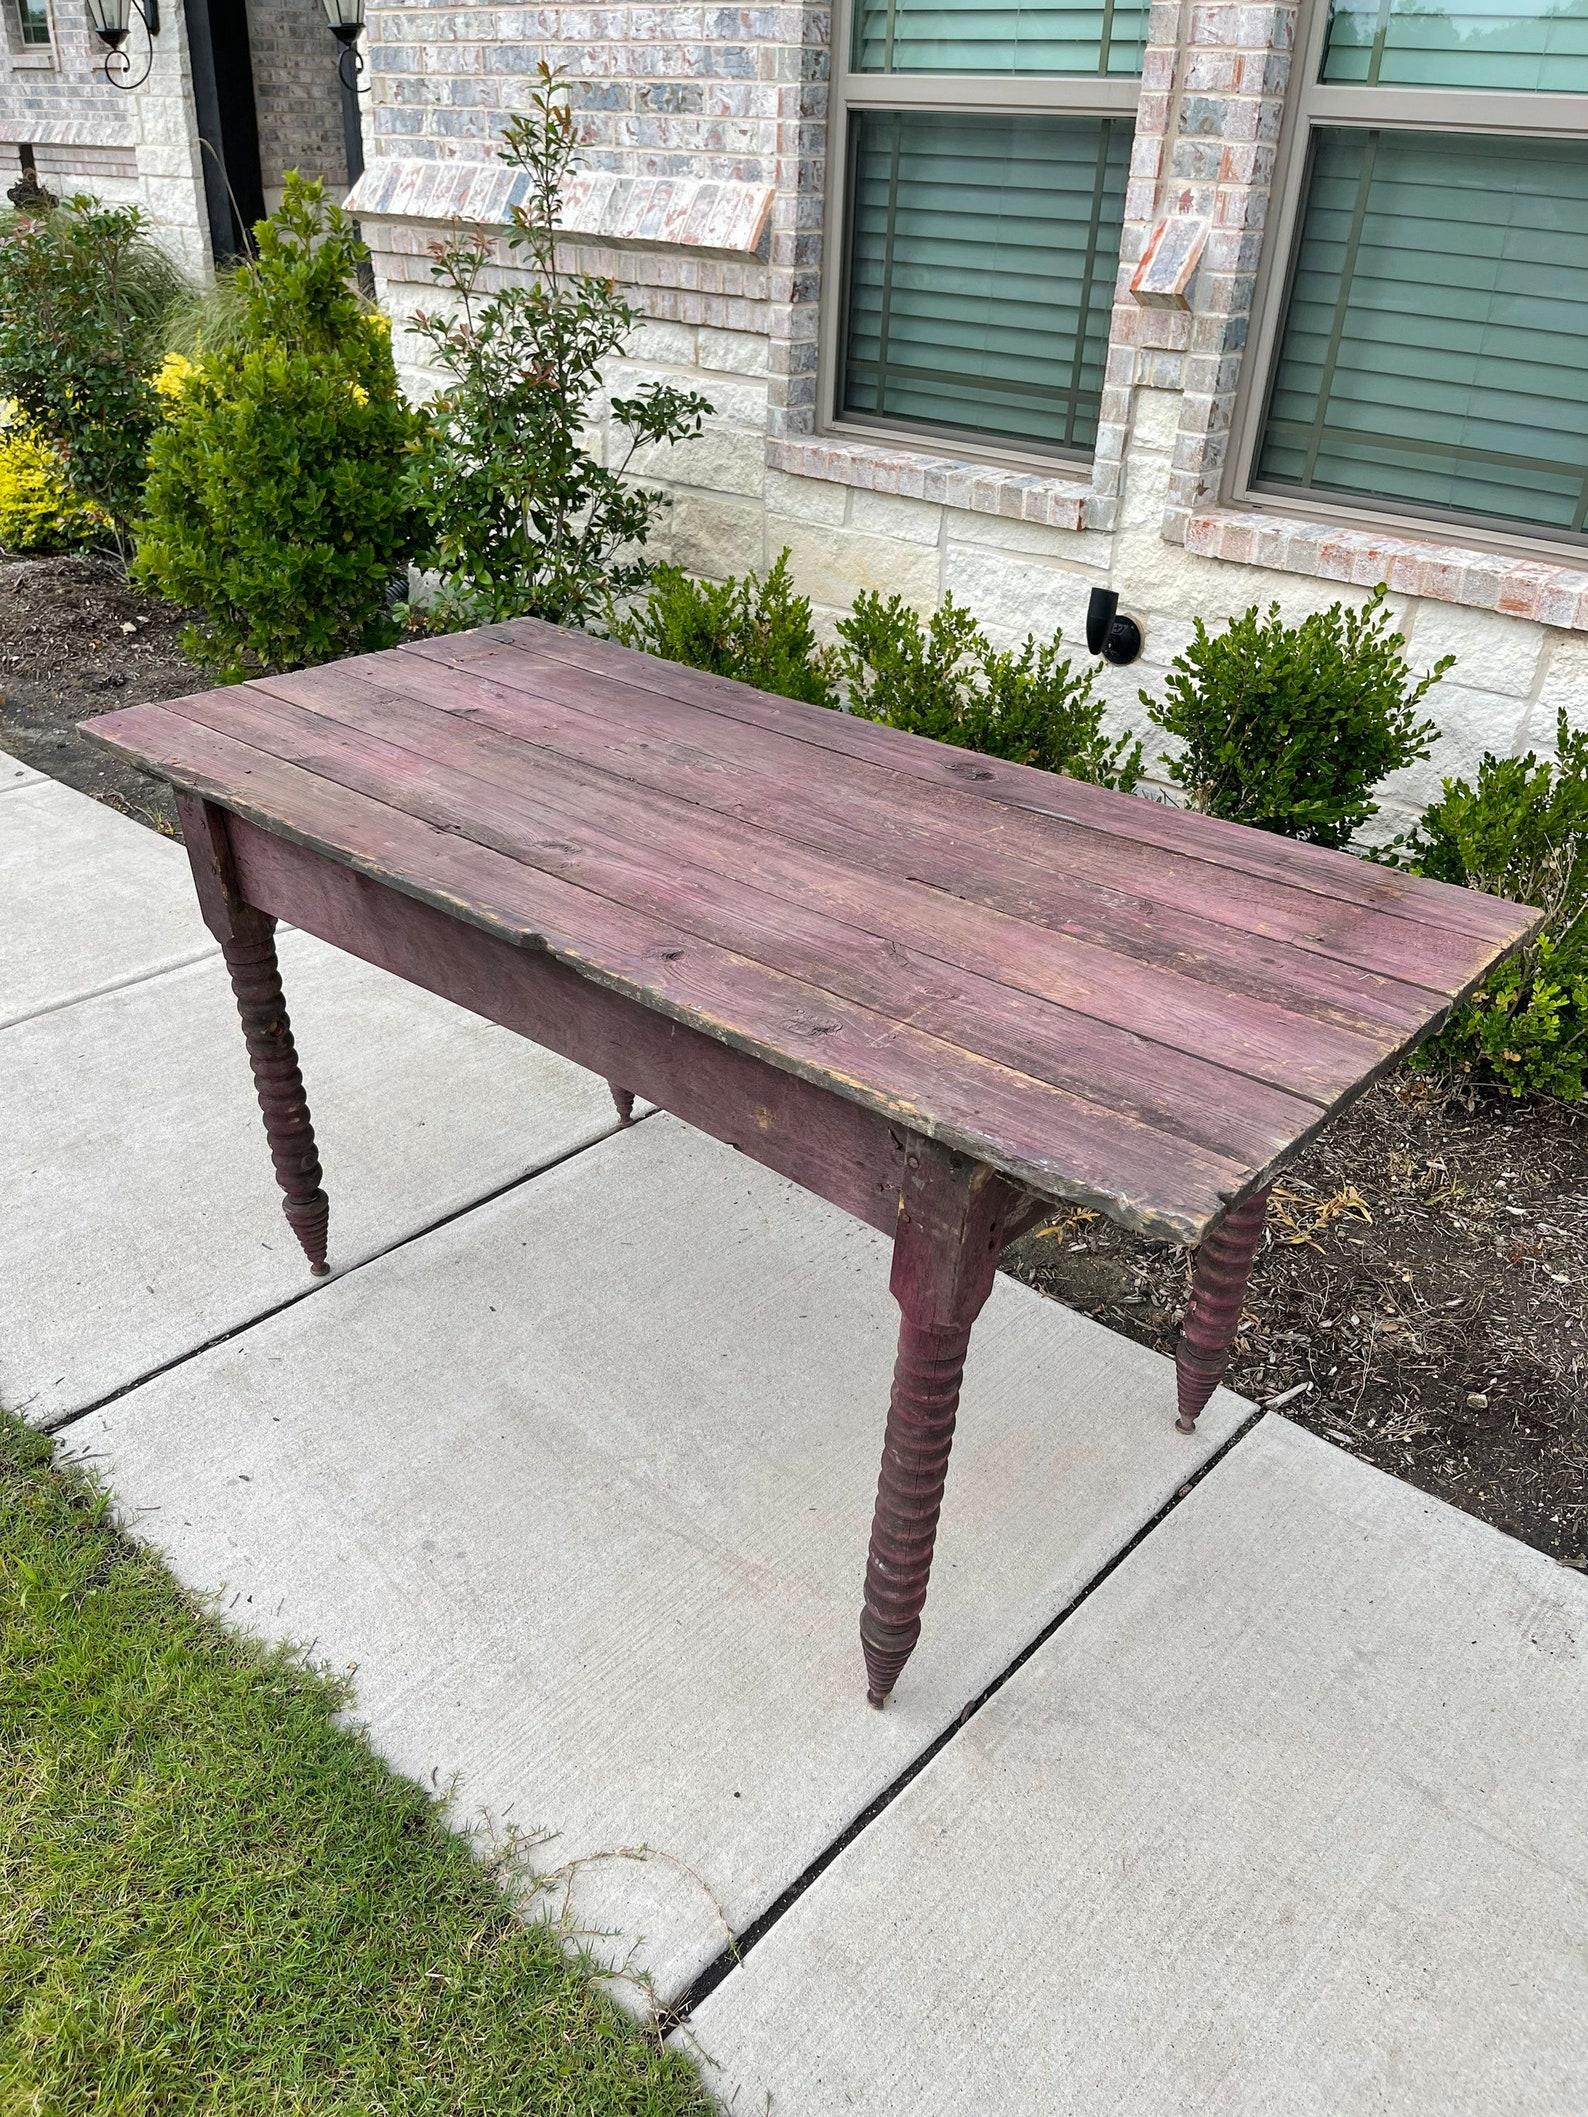 A one-of-a-kind rustic antique American country work table in original plum - wine paint finish with heavily worn distressed patina!

Full of antique character and unique folky charm, featuring primitve hand-crafted farmhouse craftsmanship and